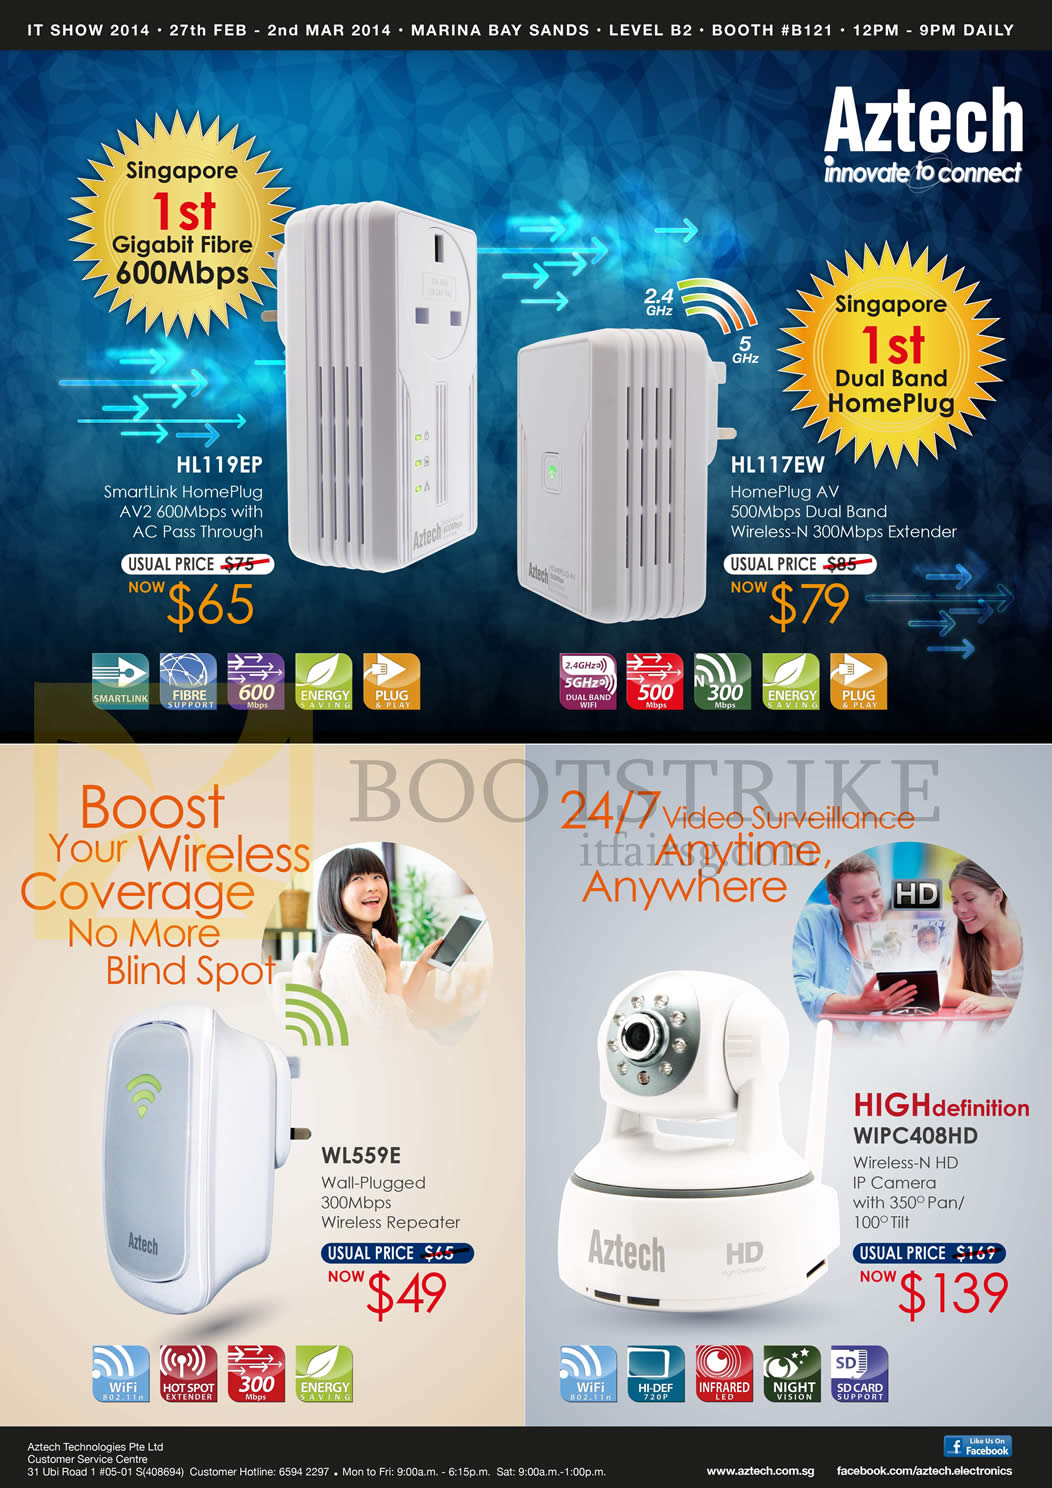 IT SHOW 2014 price list image brochure of Aztech Networking HomePlug, Wireless Extender Repeater, IPCam Video Surveillance, HL119EP, HL117Ew, WL559E, WIPC408HD